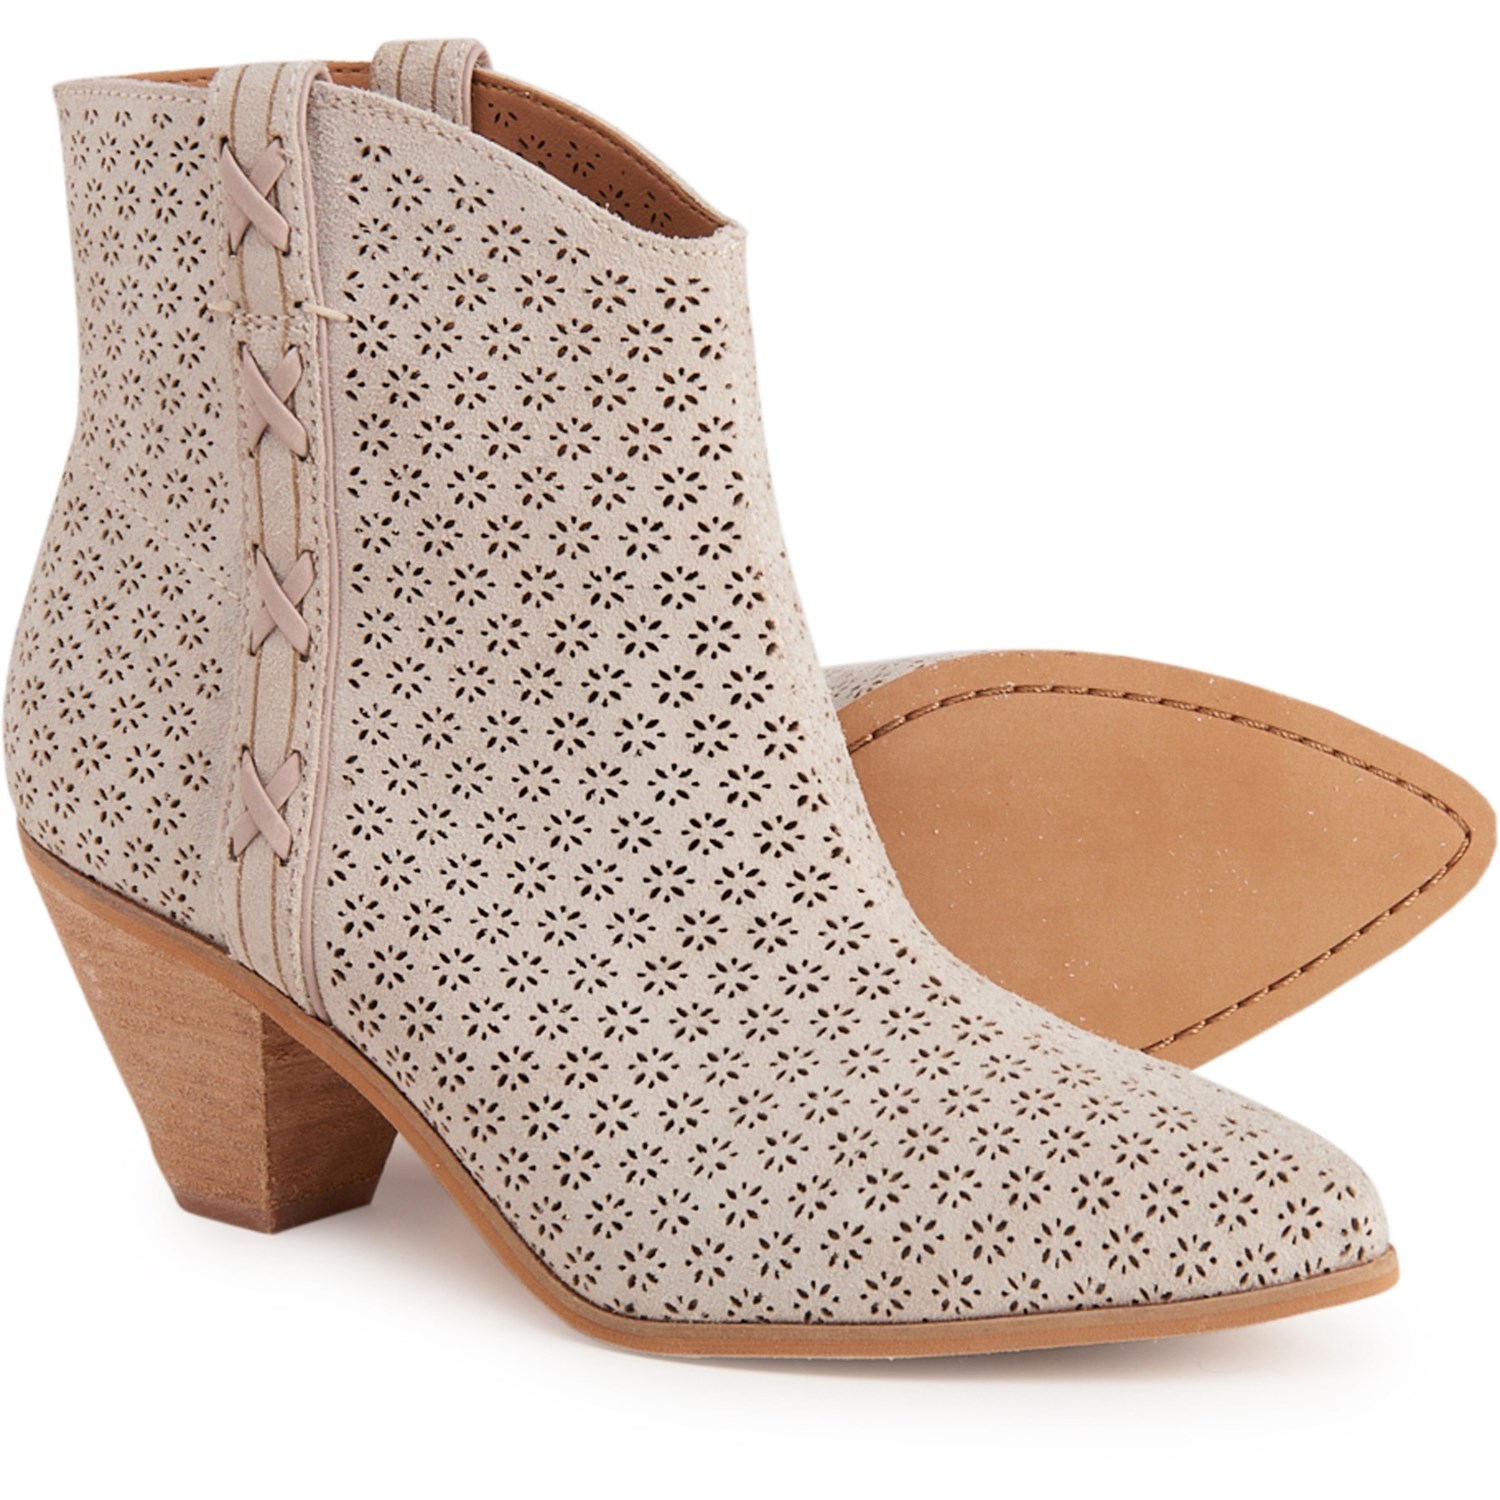 white perforated booties